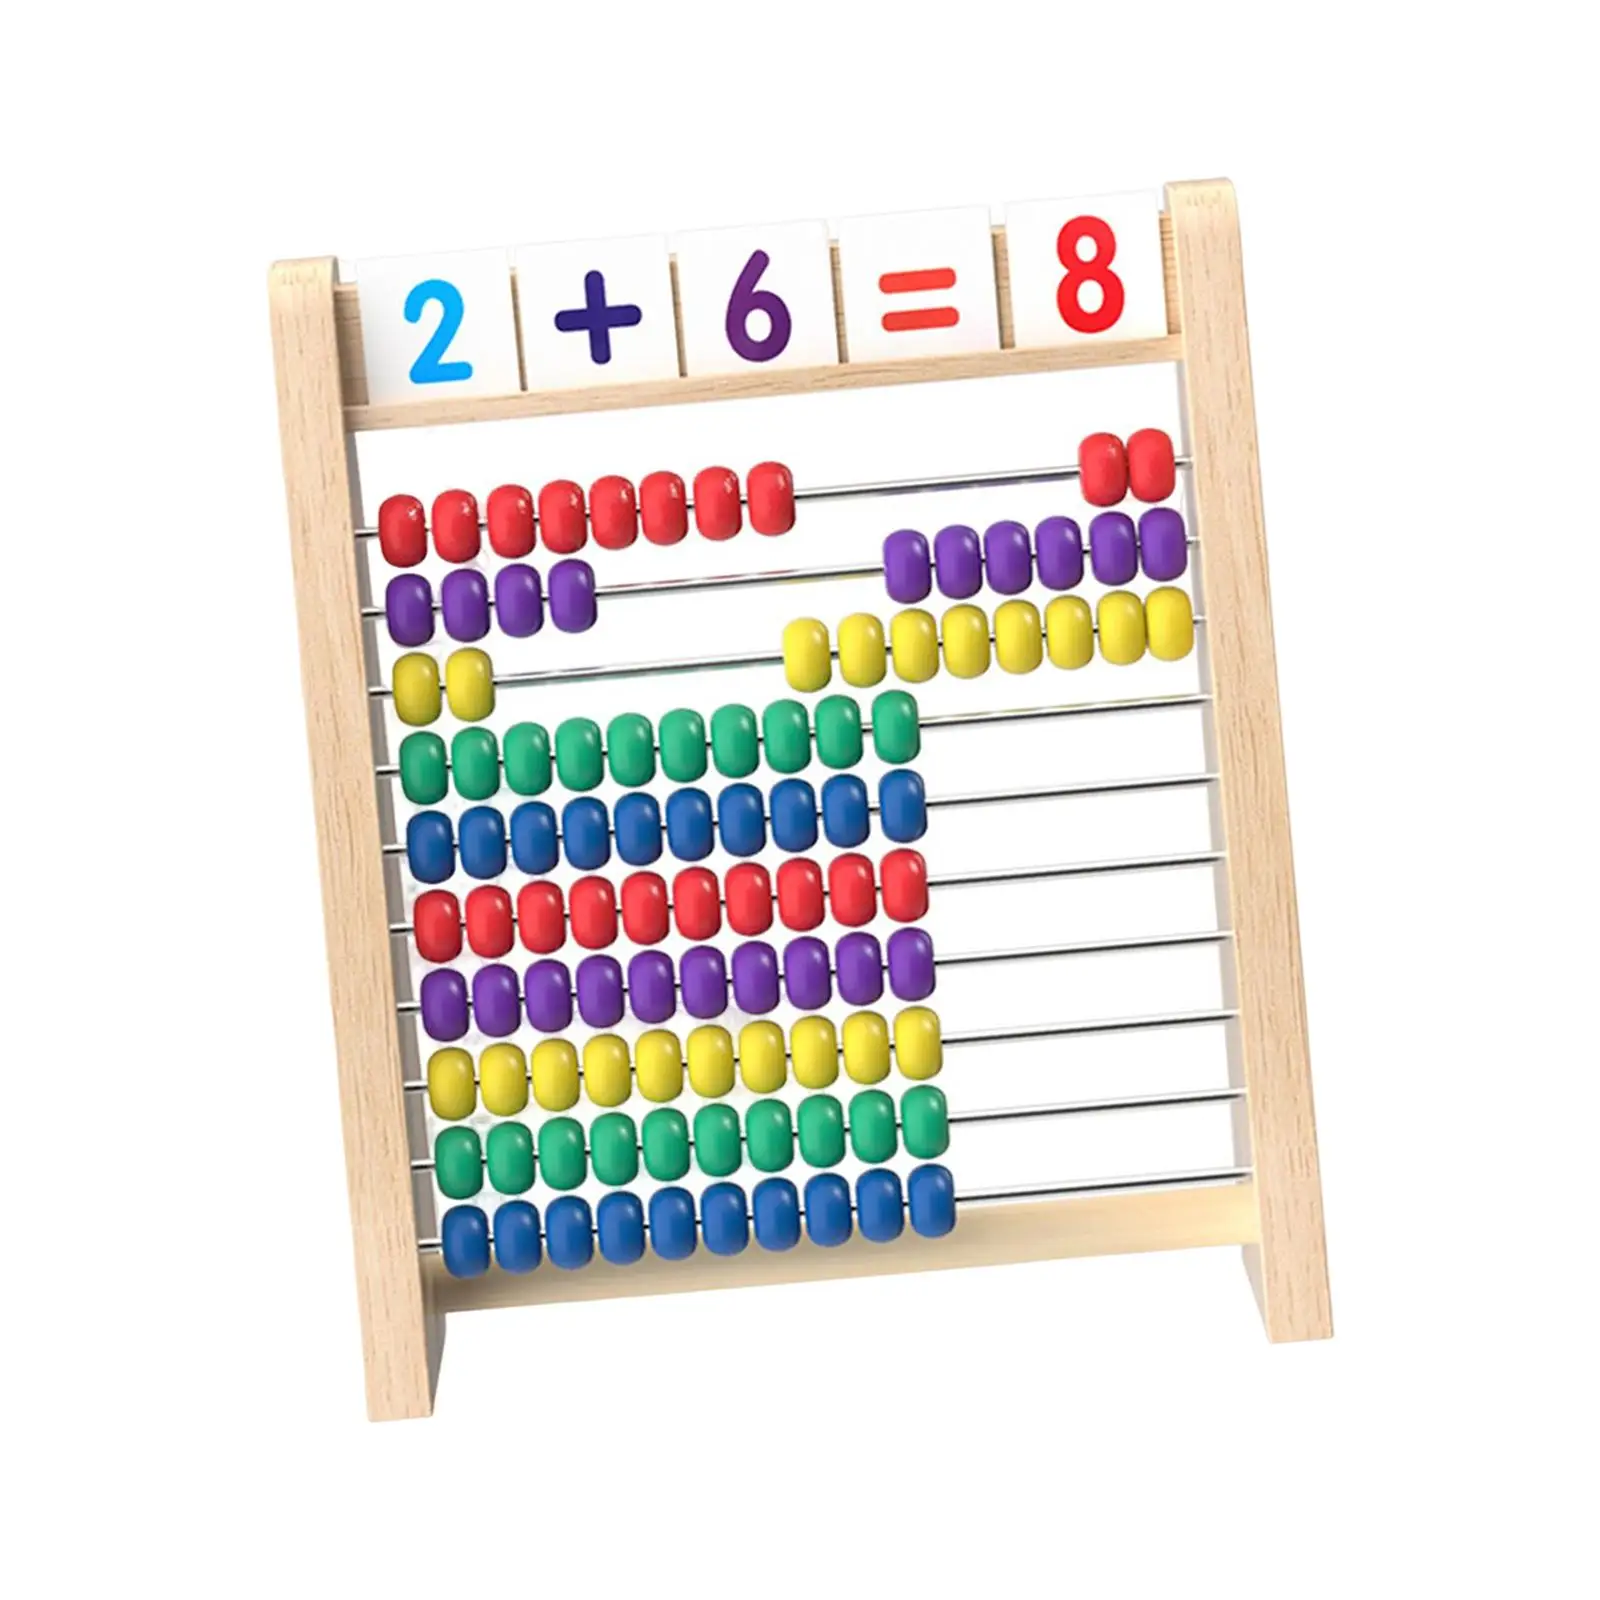 10 Row Preschool Learning Toy Counting Sticks Math Teaching Aids Wooden Abacus for Early Childhood Education Learning Preschool